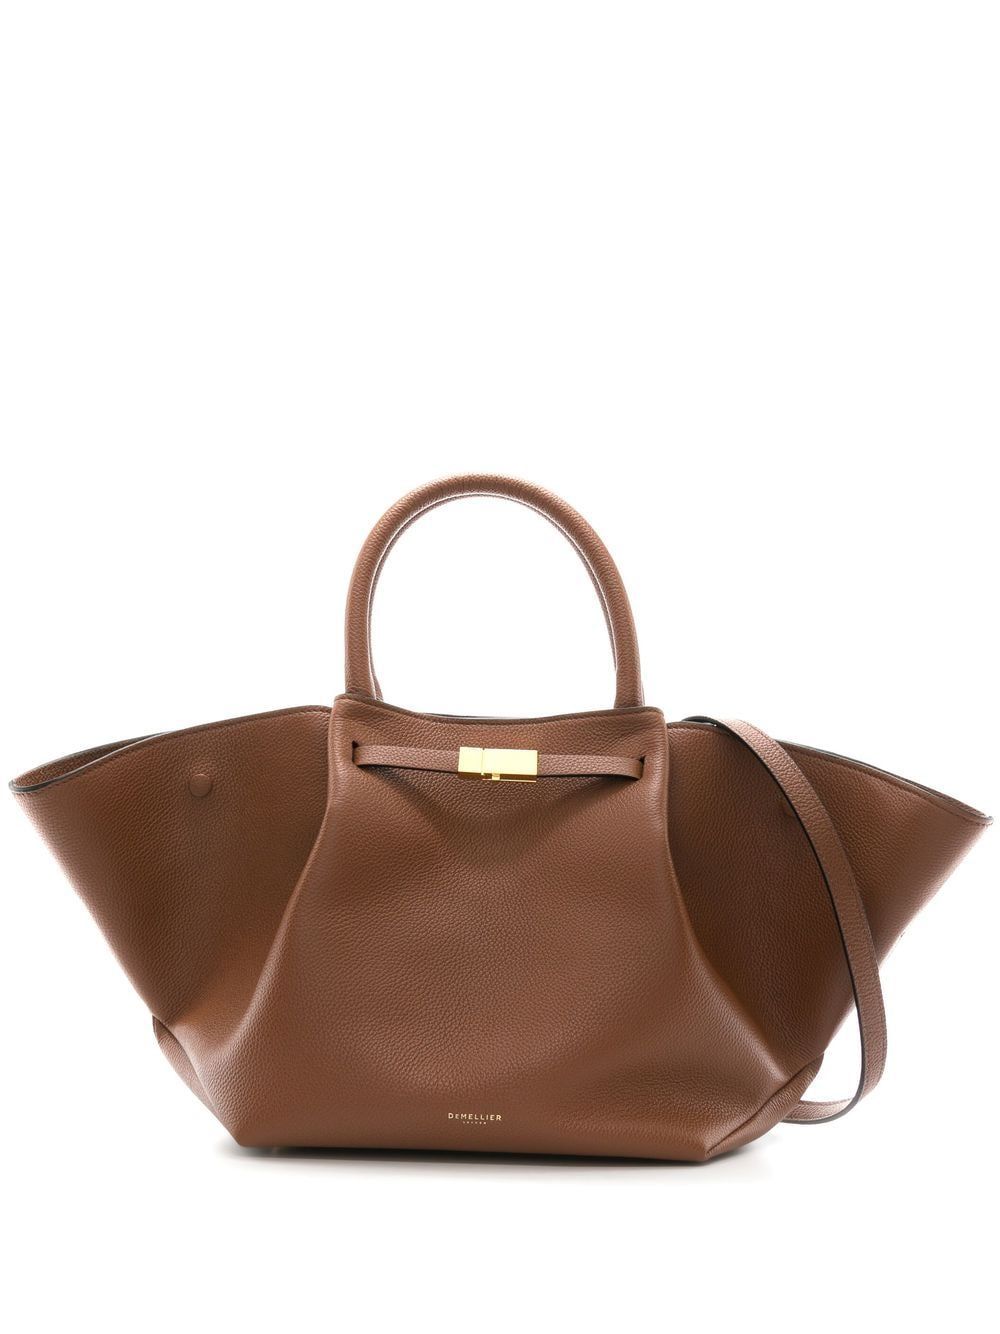 oversized leather tote bag | Farfetch Global